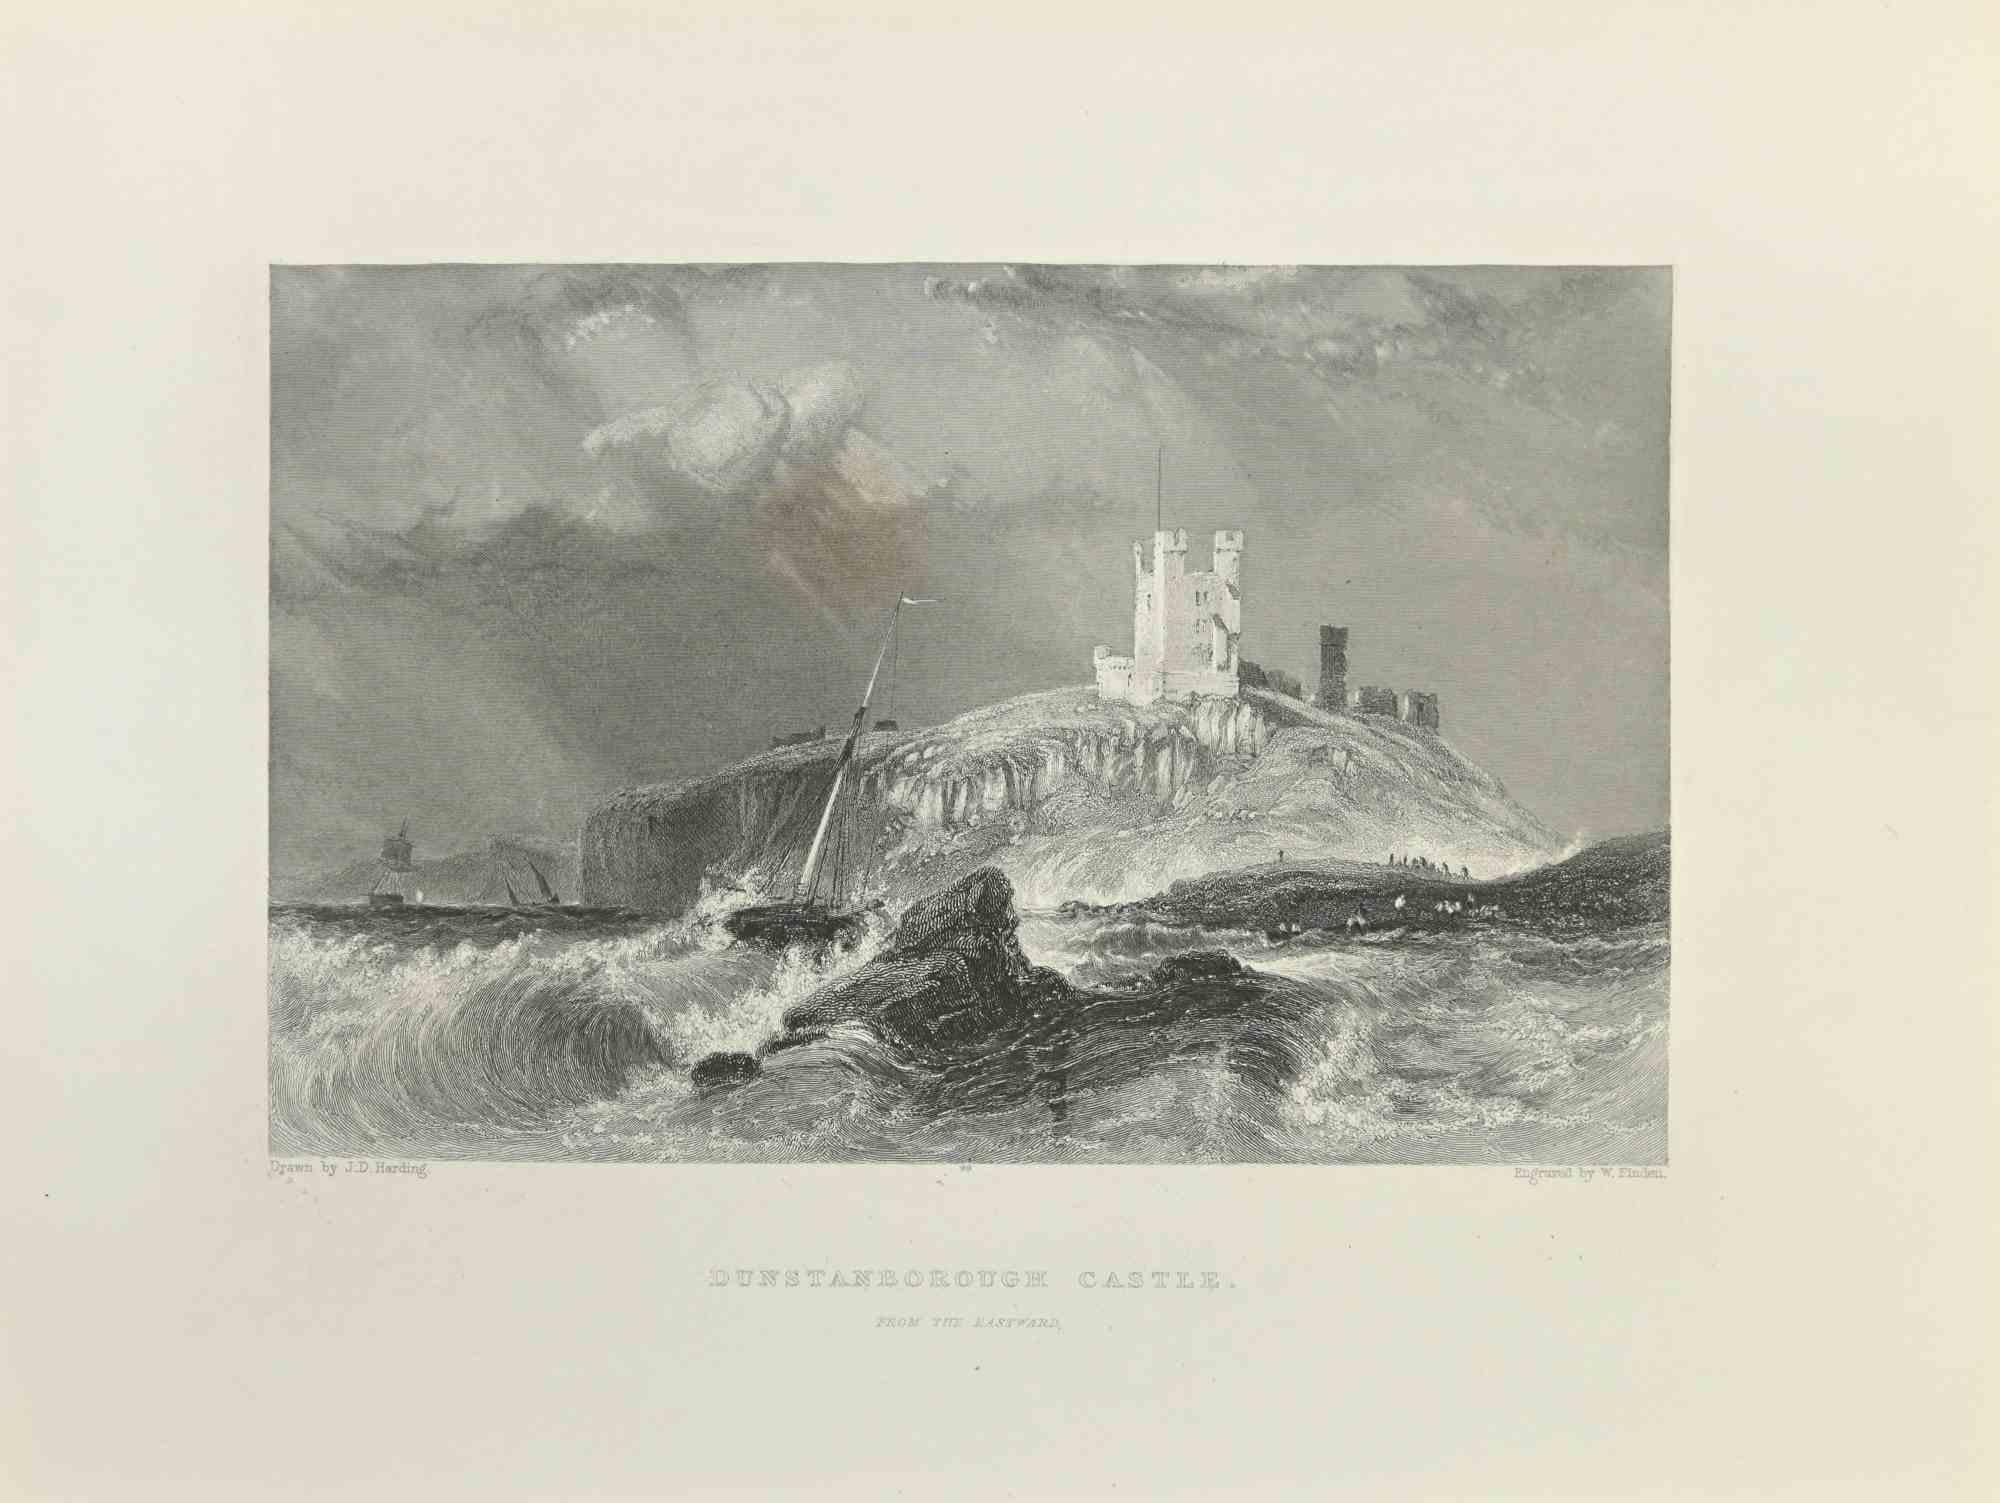 Dunstanborough Castle is an engraving realized in 1845 by W.Finden.

Signed in plate.

The artwork is realized in a well-balanced composition.